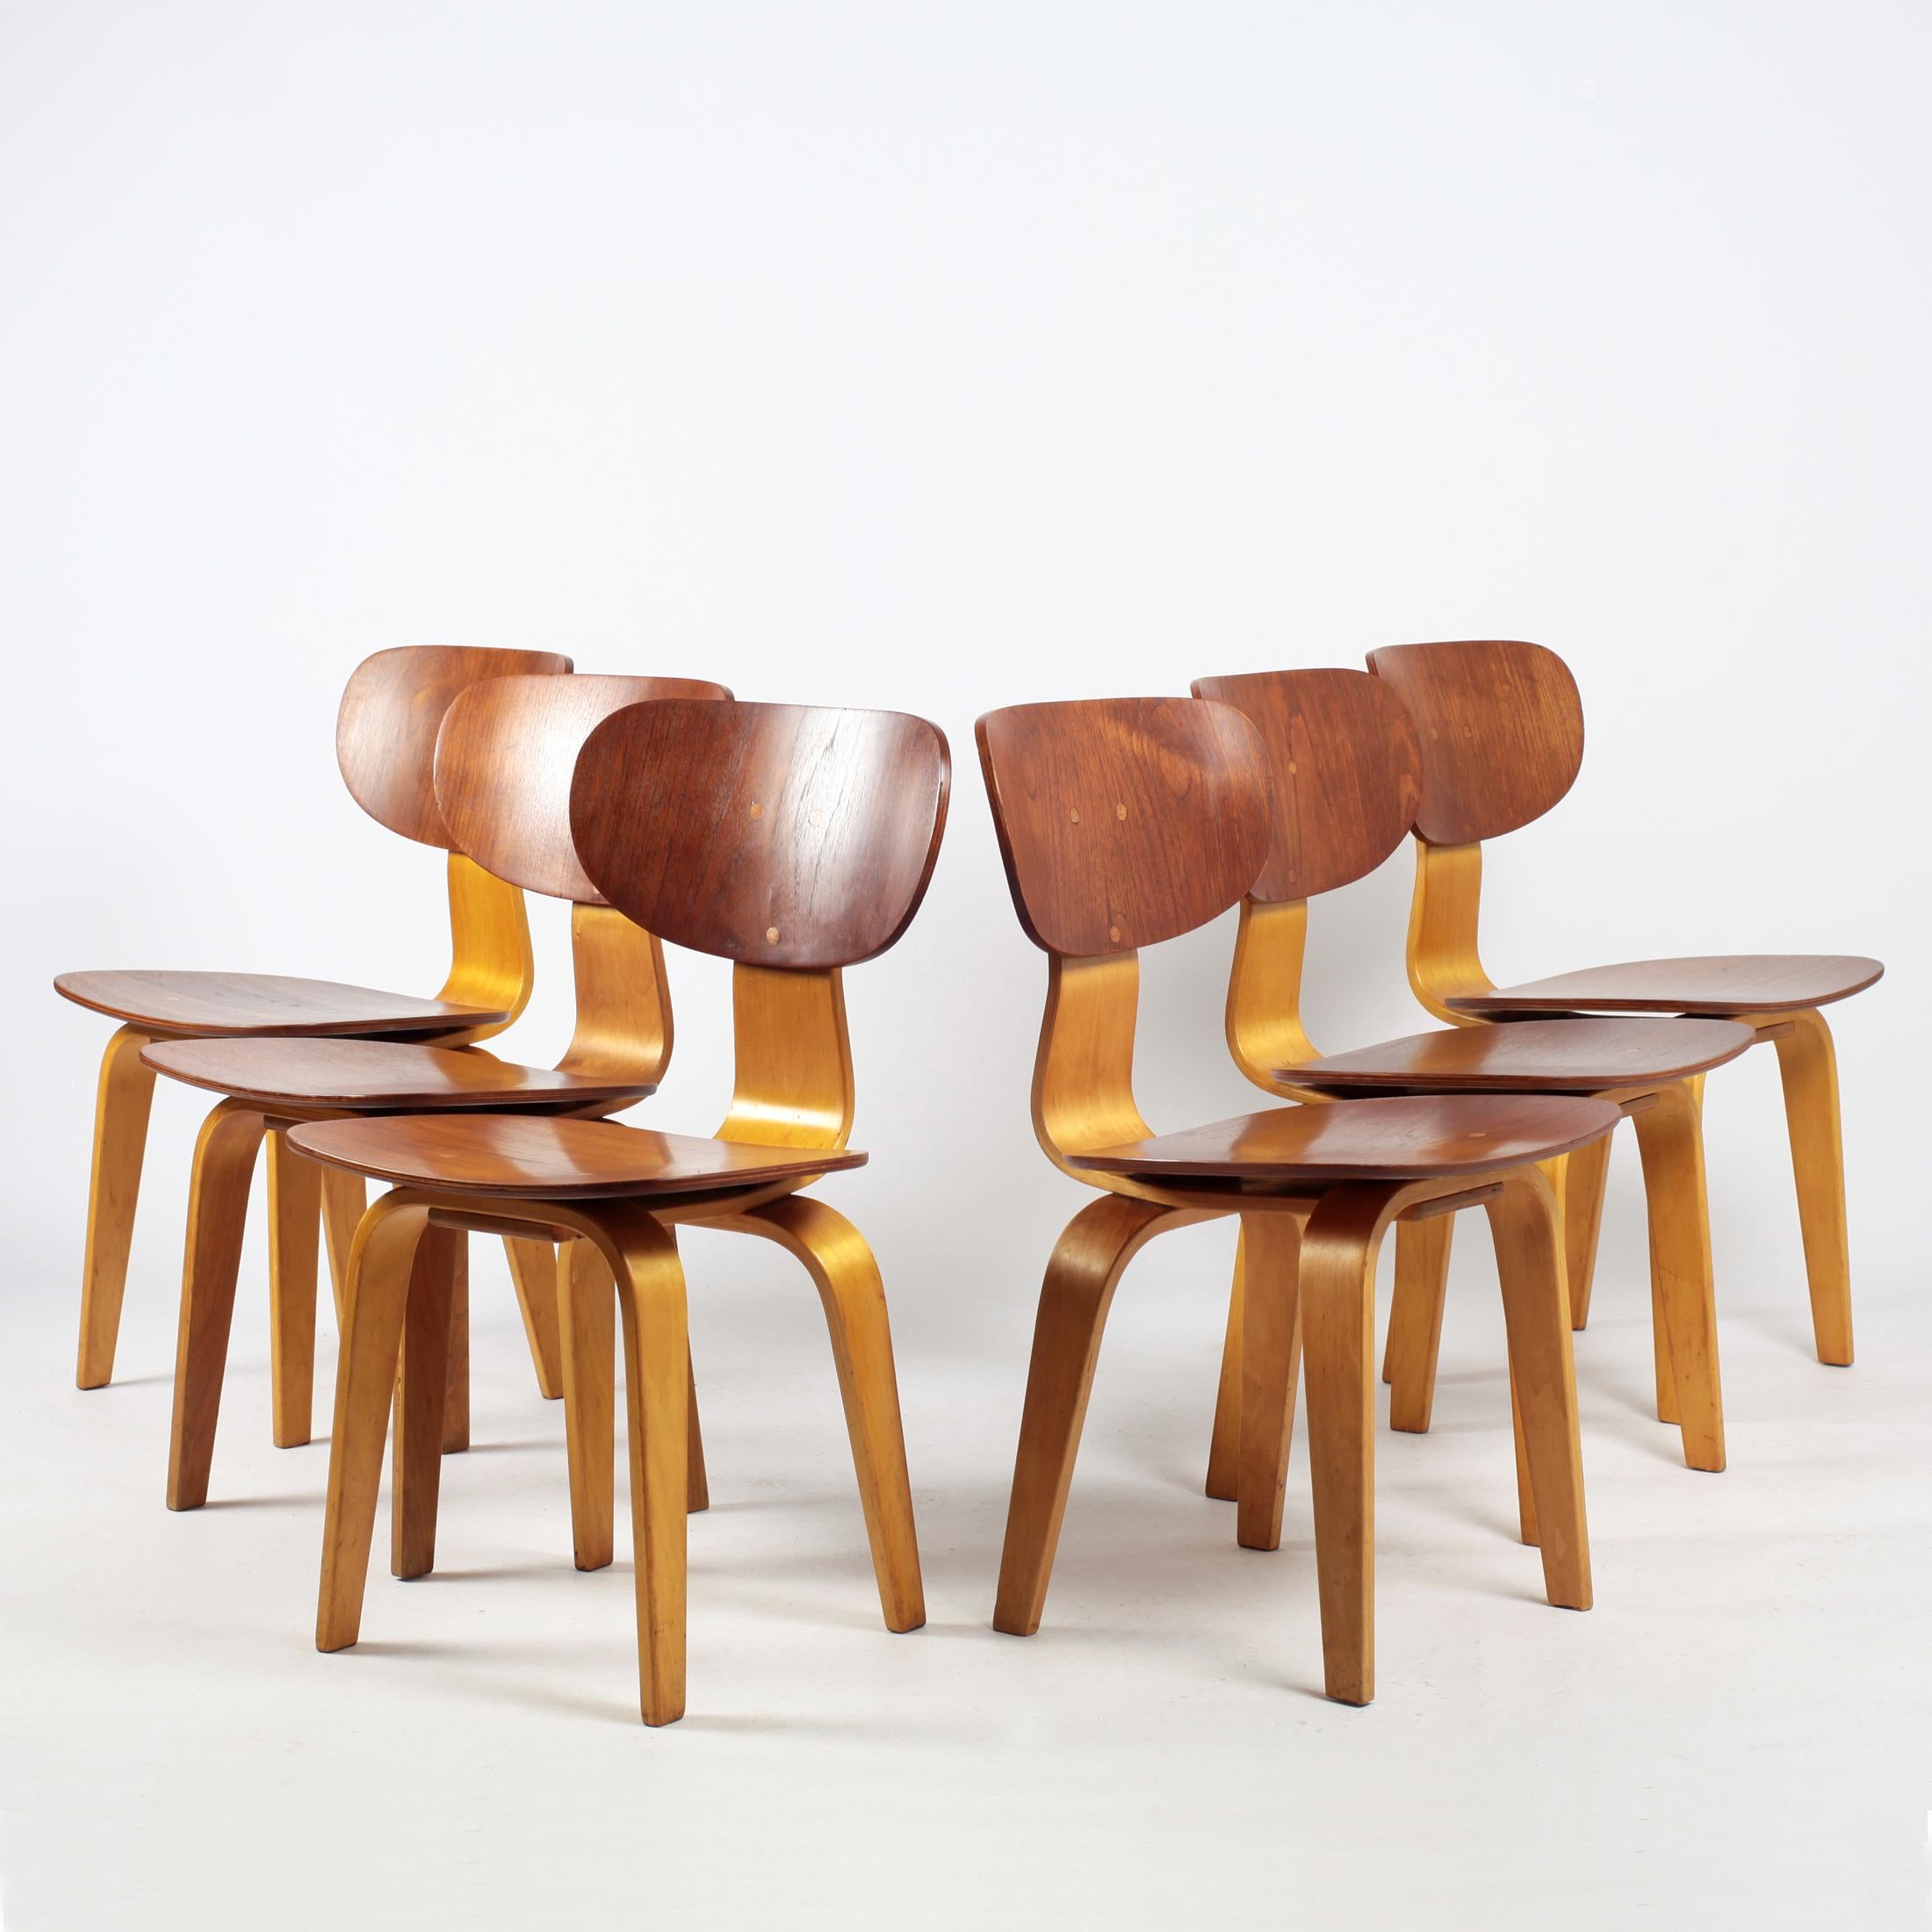 Beautiful set of 6 dining chairs designed by Cees Braakman for Pastoe. These SB13 Combex series chairs are made in bent teak and beech plywood.
Very nice patina.